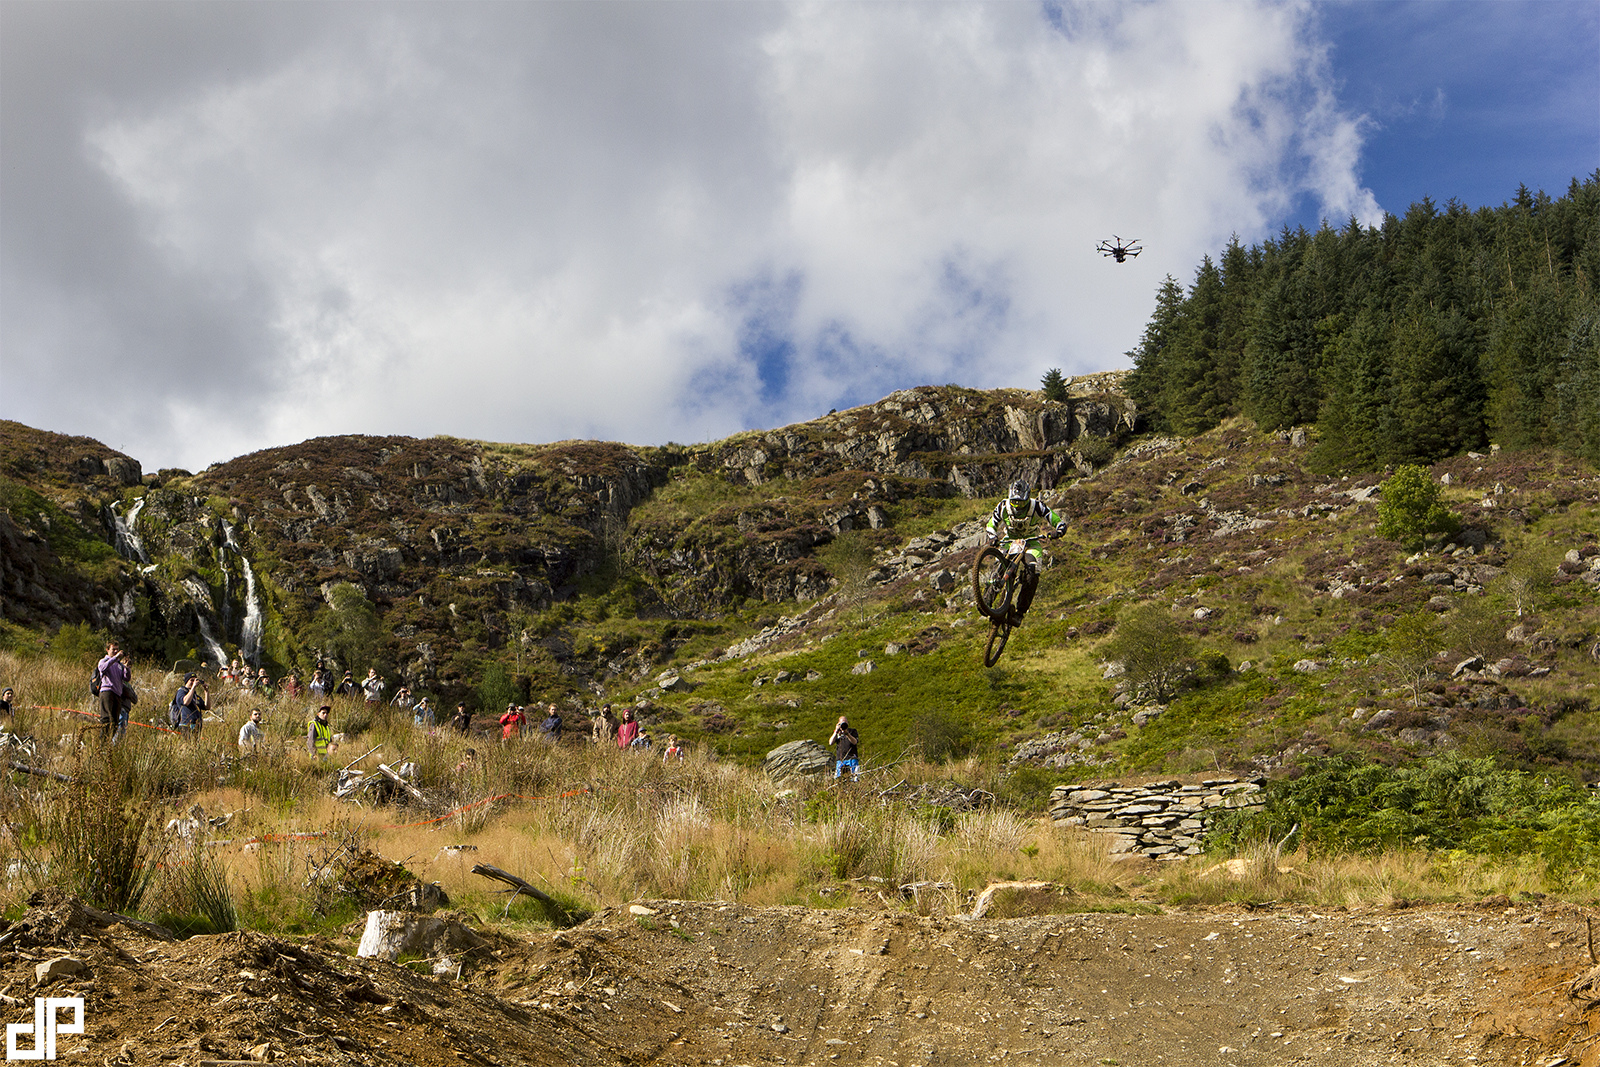 Photographs from the Red Bull ‪#Hardline‬ with Jeep UK are finally up! Take a look at the beast of a course that proved to be bigger and more technical than anything ever seen before in downhill mountain biking.